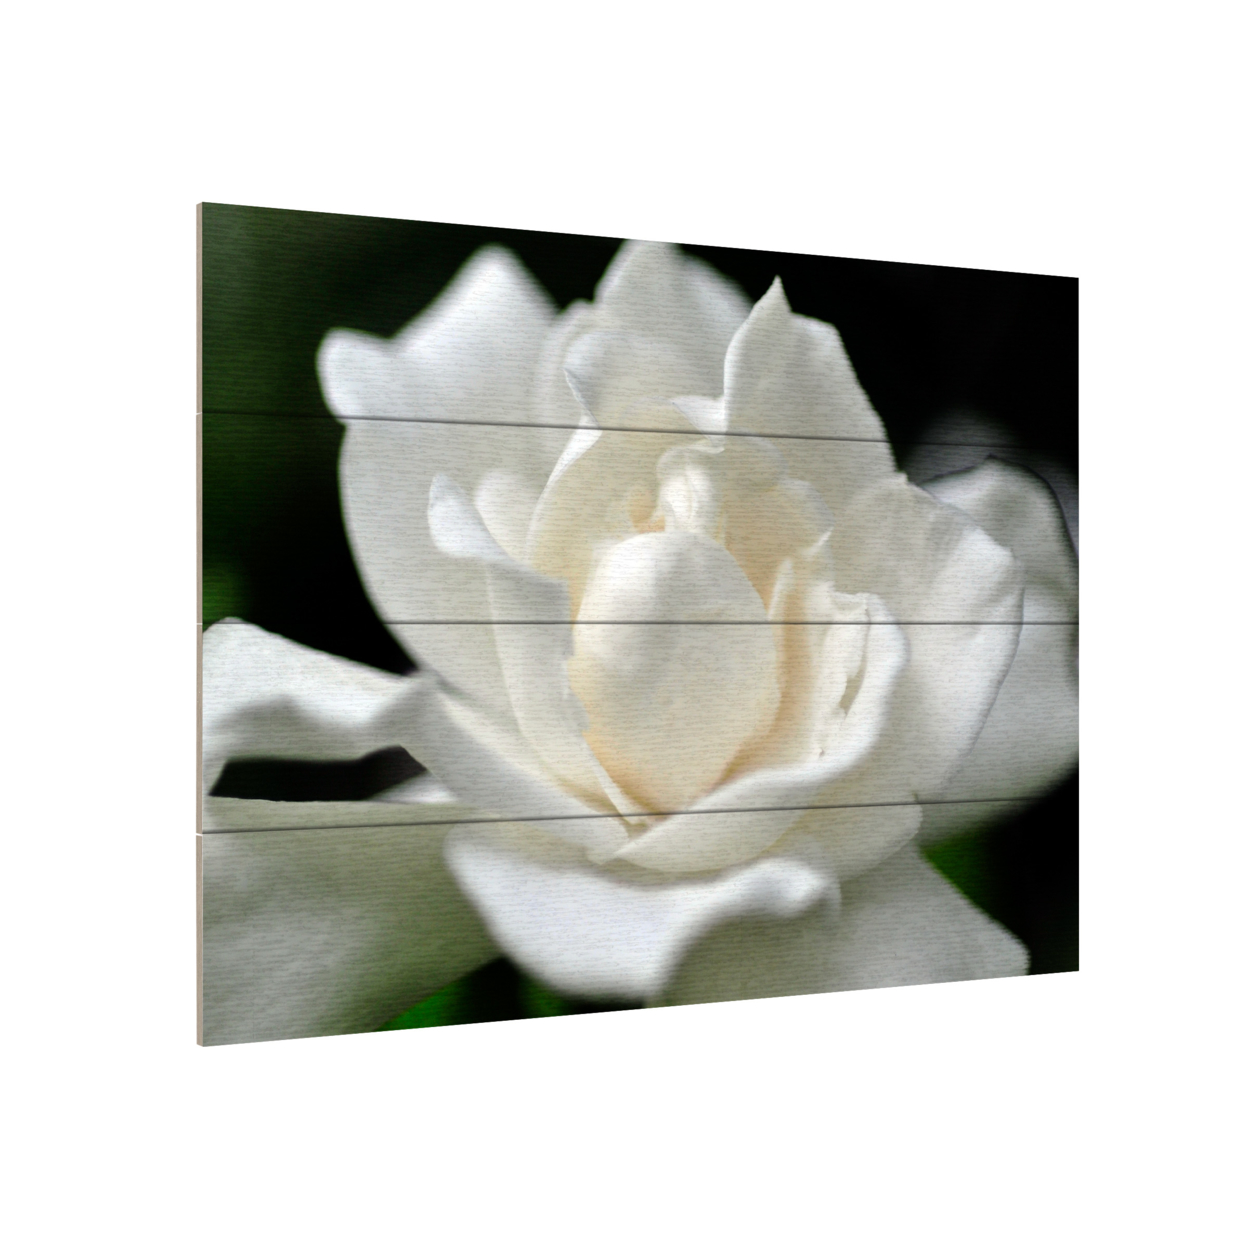 Wall Art 12 X 16 Inches Titled Lovely Gardenia Ready To Hang Printed On Wooden Planks